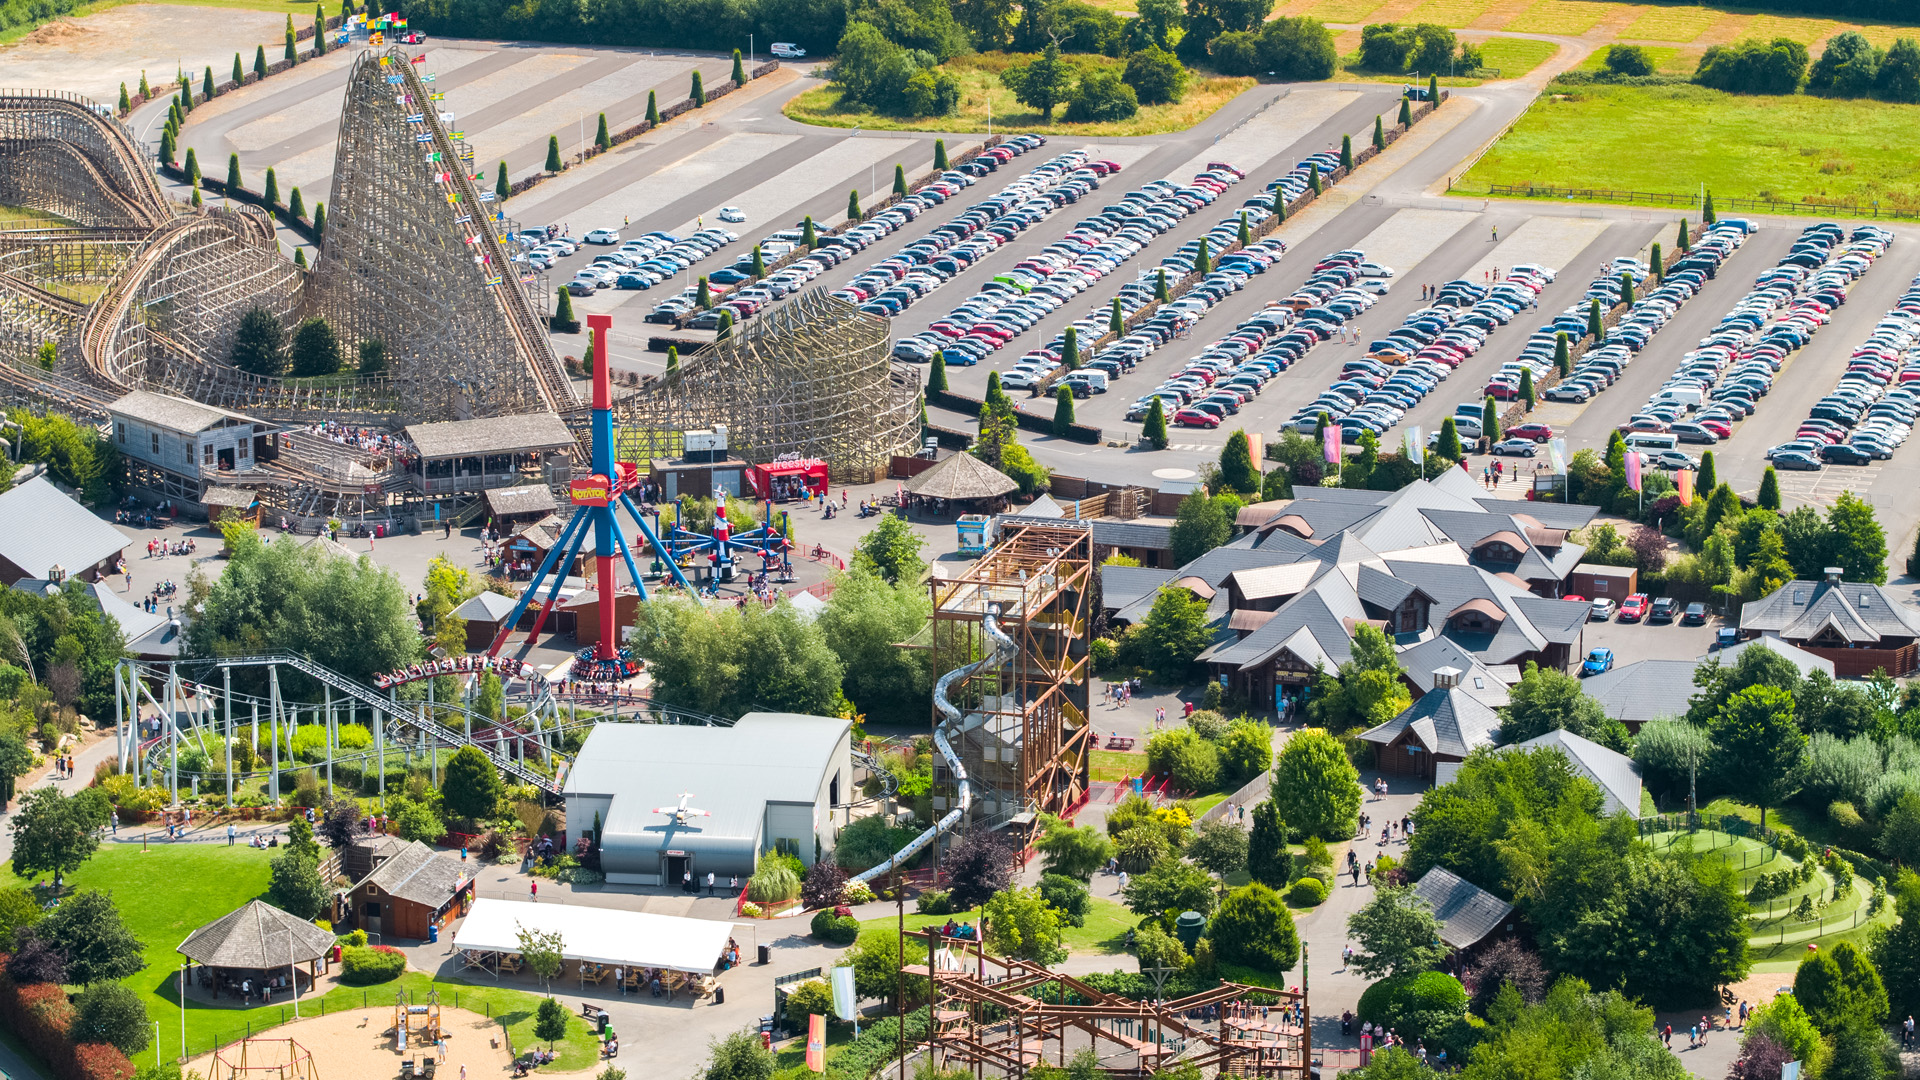 aerial view of emerald park theme park with attractions and carpark spaces